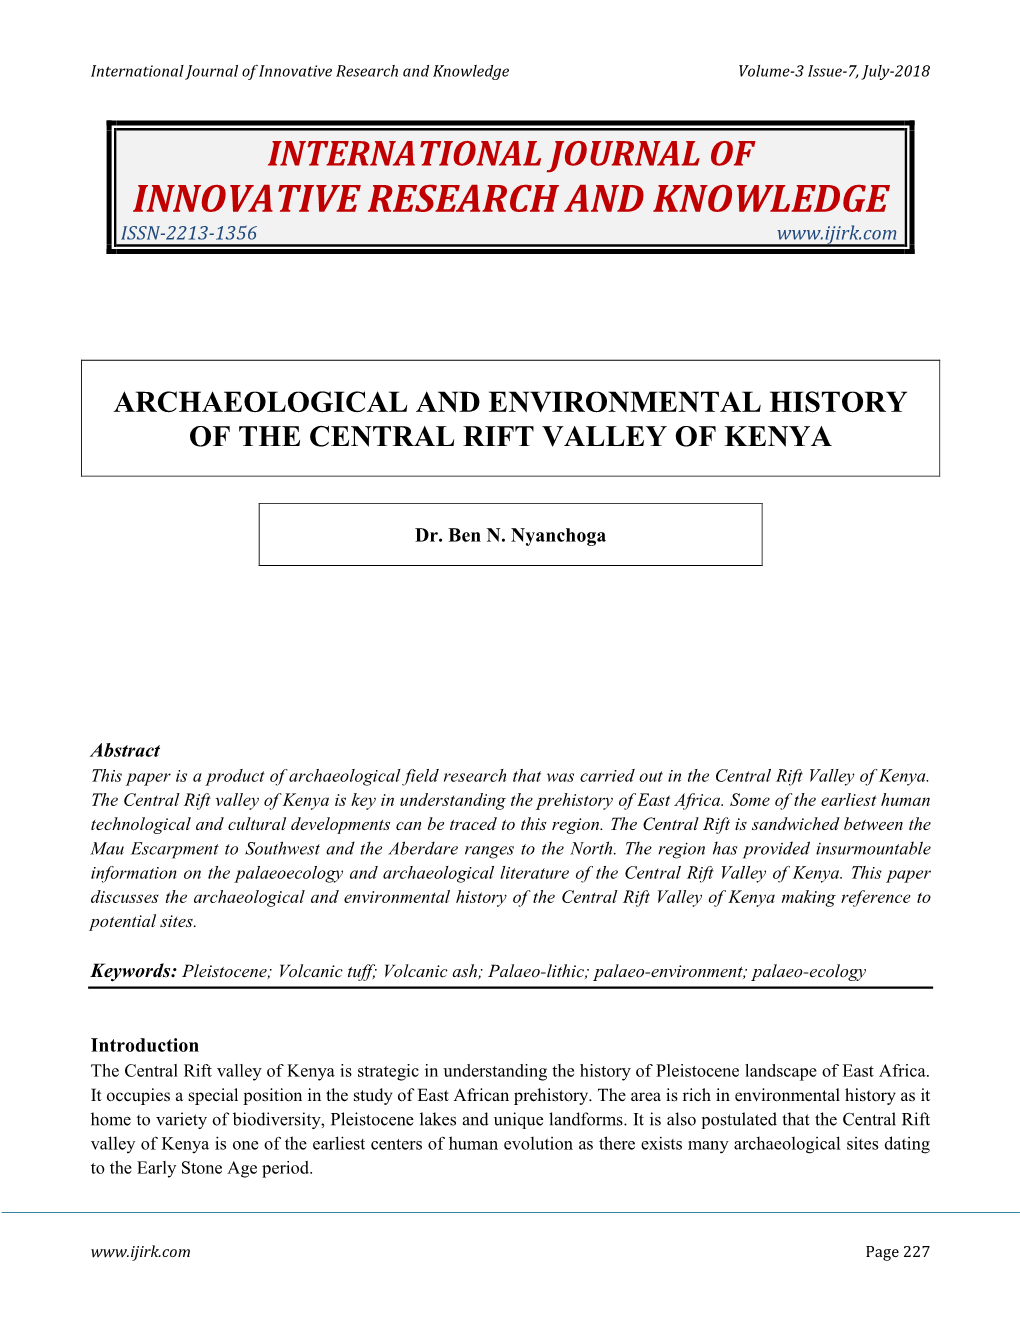 Archaeological and Environmental History of the Central Rift Valley of Kenya